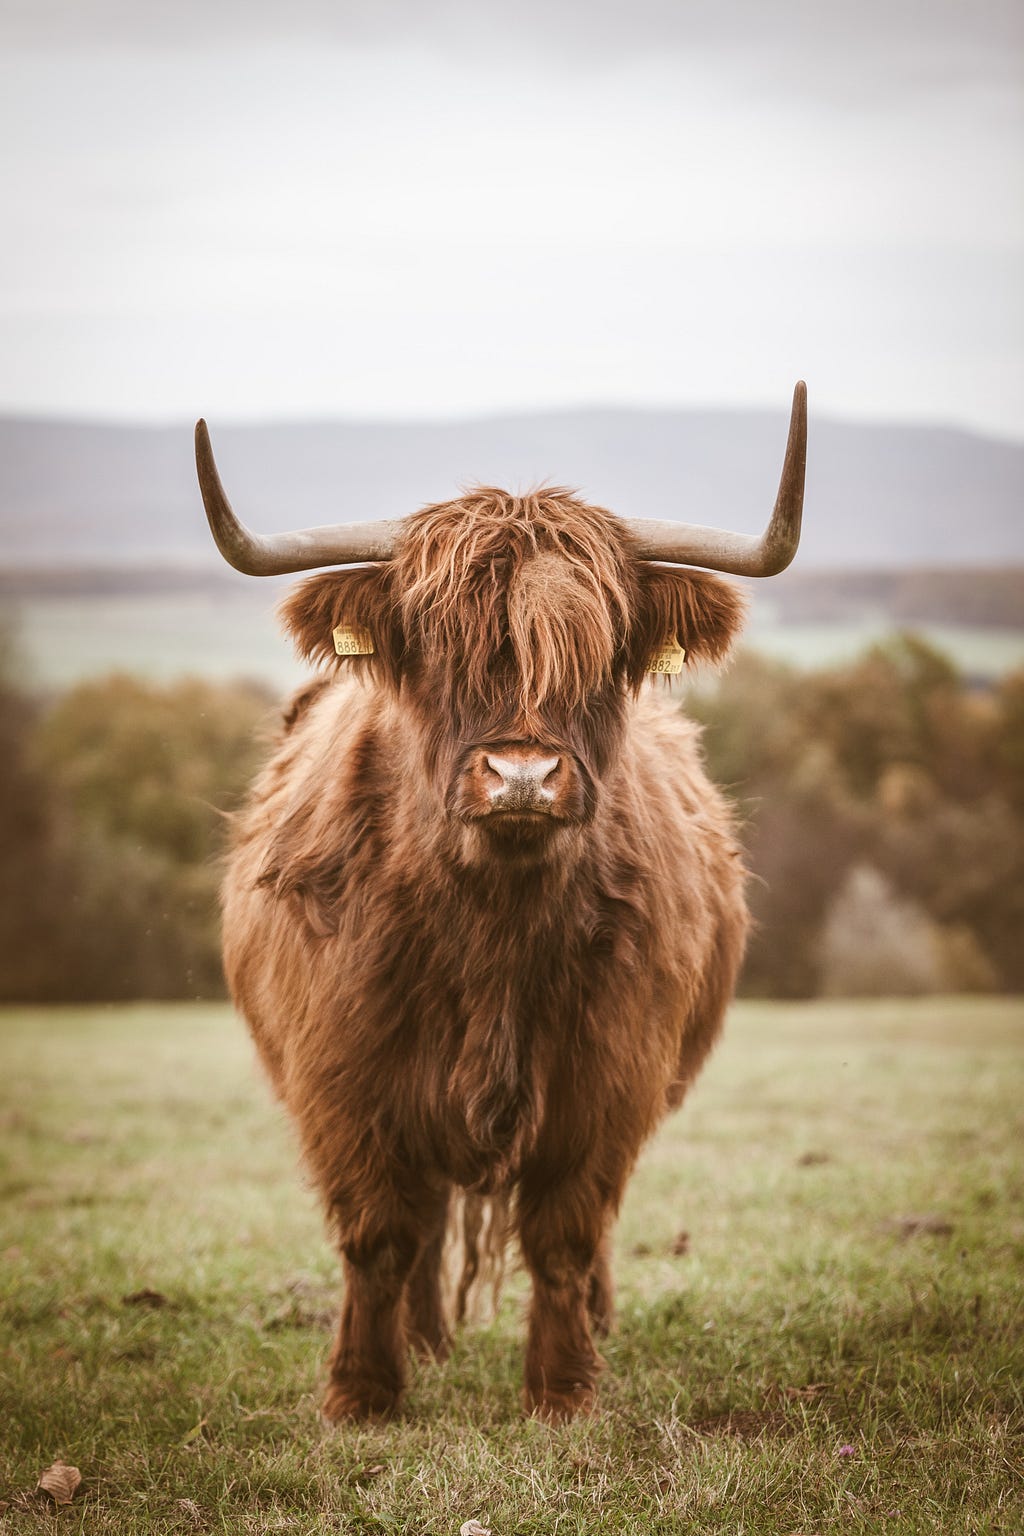 a very furry bull facing front with hair covering its eyes, standing in field, horns turned upward